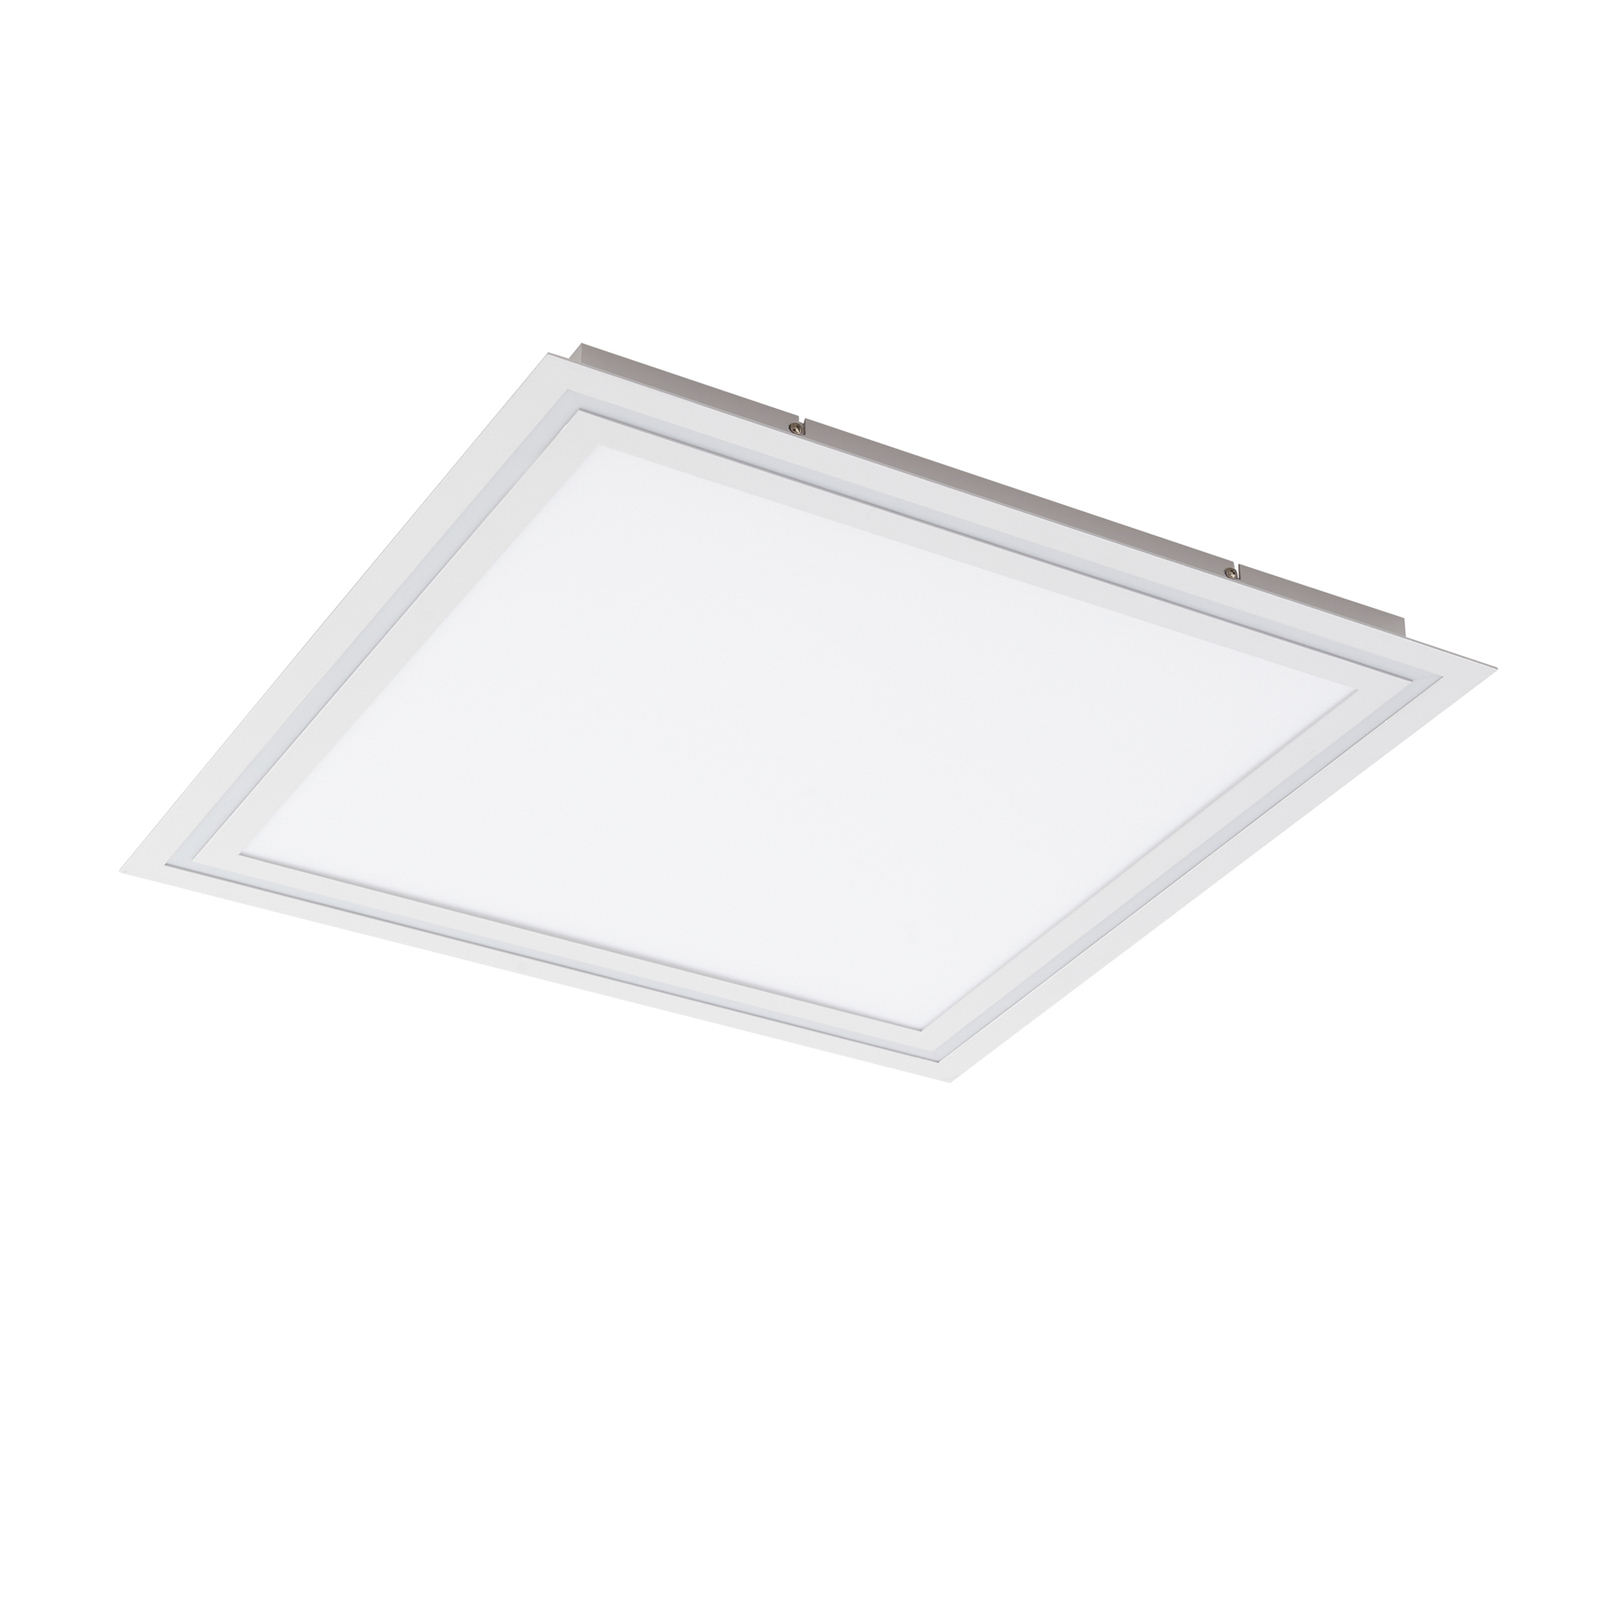 Lucande Leicy LED ceiling lamp RGBW white 64 cm